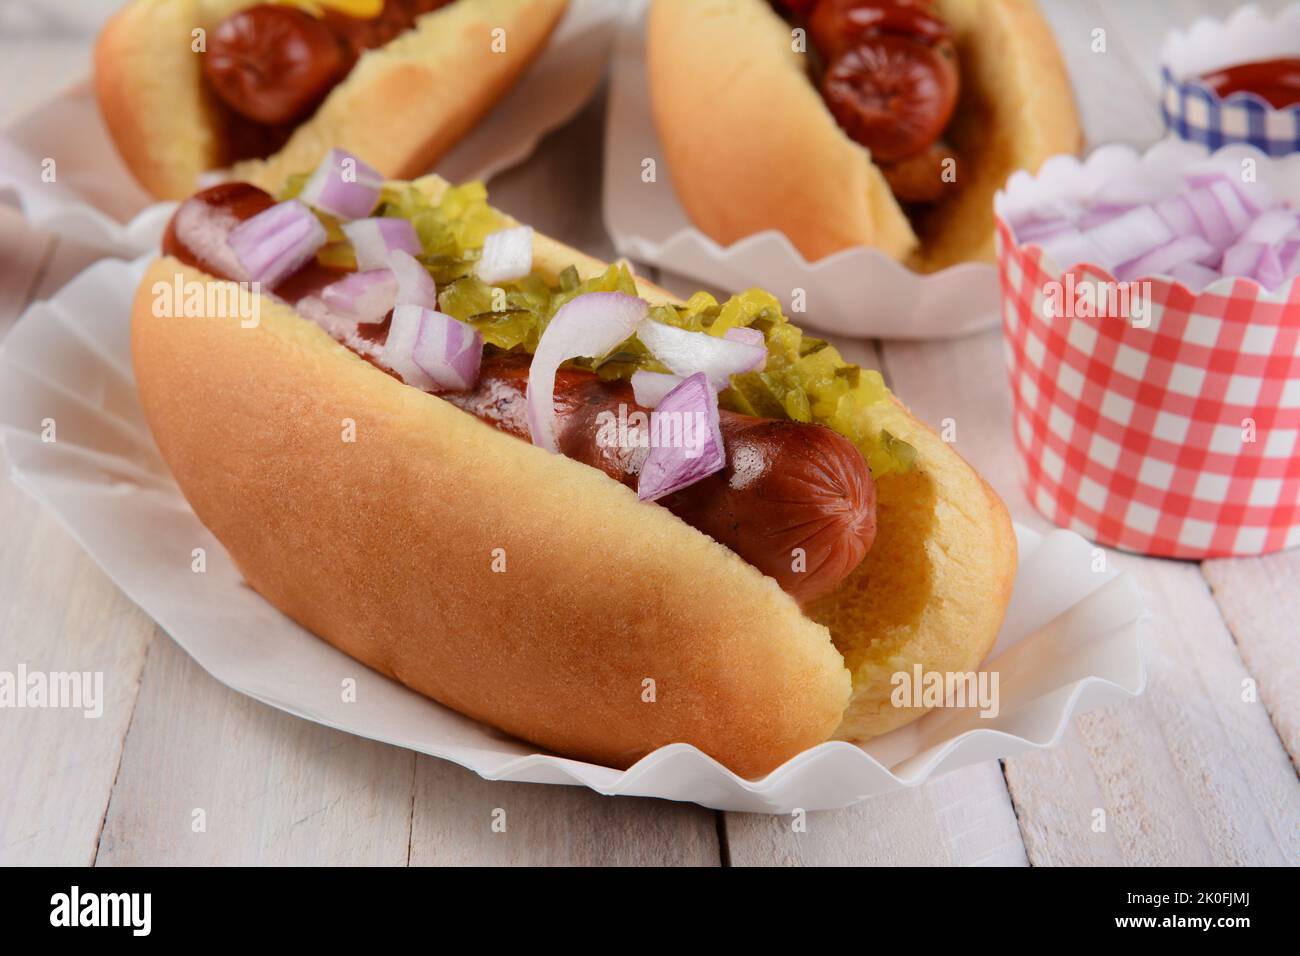 Closeup of a hot dog with relish and onions, in the background are two additional franks in buns and cups of condiments. Stock Photo